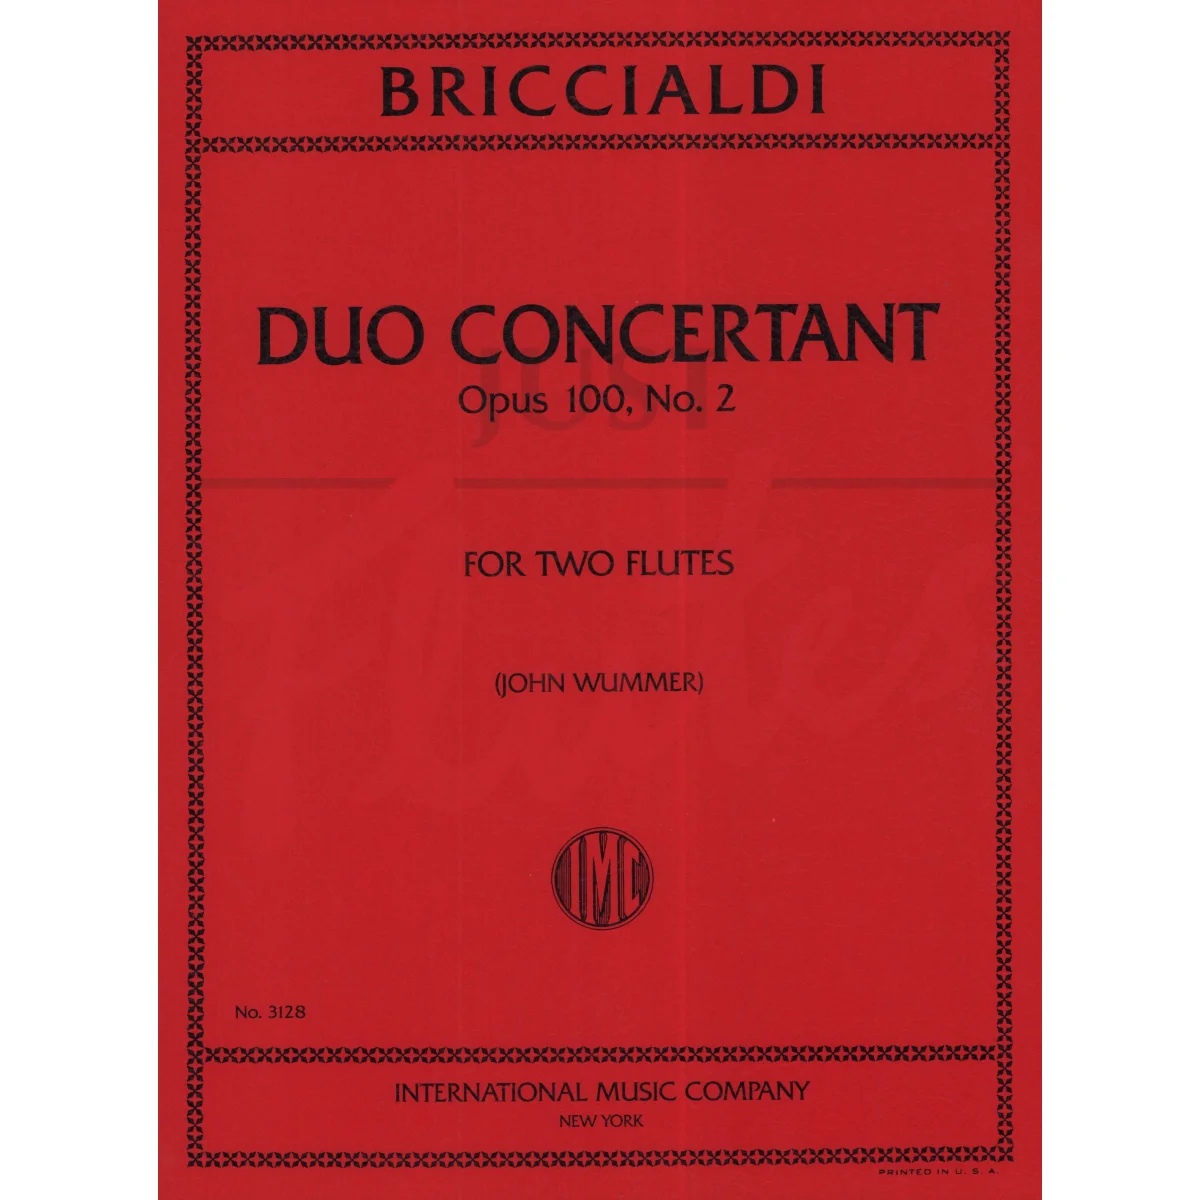 Duo Concertant for Two Flutes